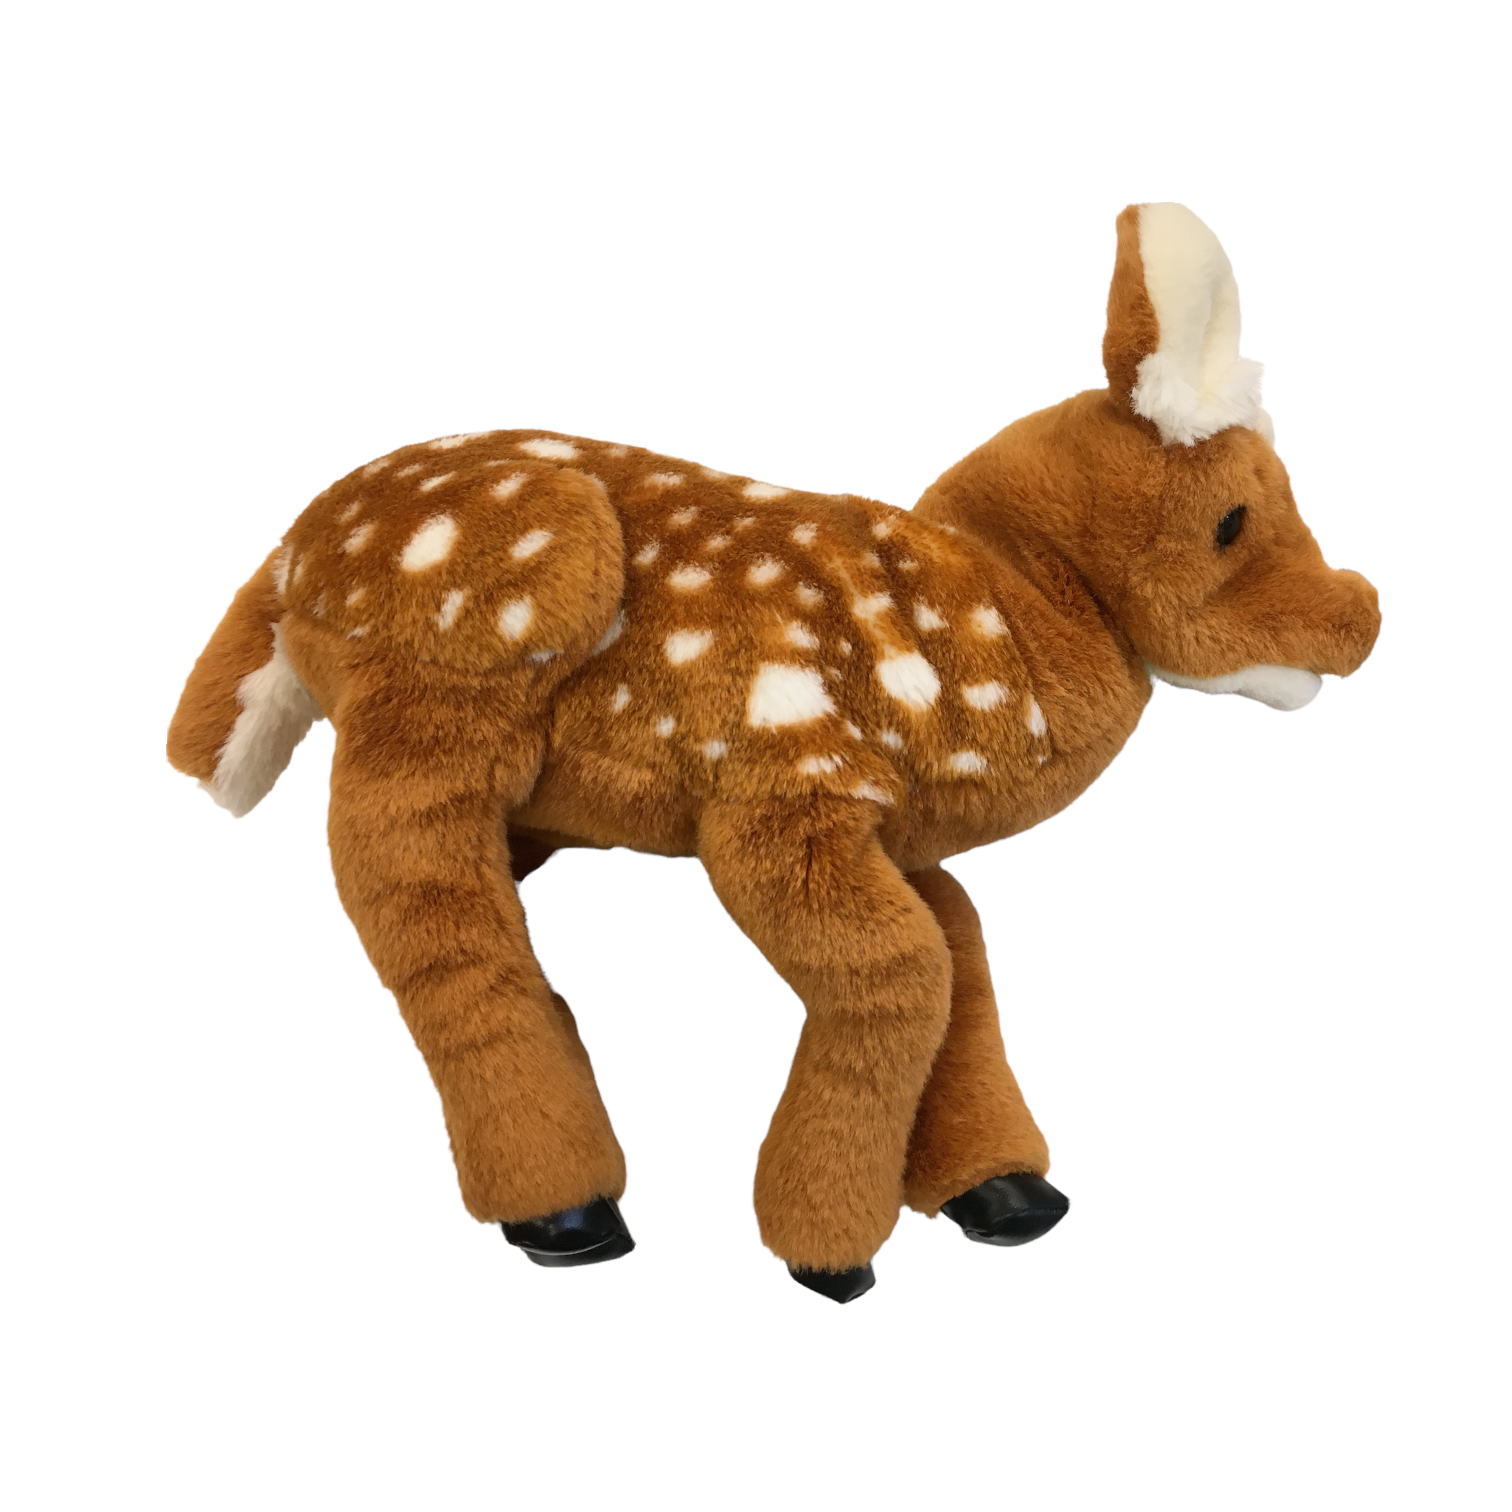 Puppet: Spotted Fawn, Toys

#resalerocks #pipsqueakresale #vancouverwa #portland #reusereducerecycle #fashiononabudget #chooseused #consignment #savemoney #shoplocal #weship #keepusopen #shoplocalonline #resale #resaleboutique #mommyandme #minime #fashion #reseller                                                                                                                                      Cross posted, items are located at #PipsqueakResaleBoutique, payments accepted: cash, paypal & credit cards. Any flaws will be described in the comments. More pictures available with link above. Local pick up available at the #VancouverMall, tax will be added (not included in price), shipping available (not included in price, *Clothing, shoes, books & DVDs for $6.99; please contact regarding shipment of toys or other larger items), item can be placed on hold with communication, message with any questions. Join Pipsqueak Resale - Online to see all the new items! Follow us on IG @pipsqueakresale & Thanks for looking! Due to the nature of consignment, any known flaws will be described; ALL SHIPPED SALES ARE FINAL. All items are currently located inside Pipsqueak Resale Boutique as a store front items purchased on location before items are prepared for shipment will be refunded.